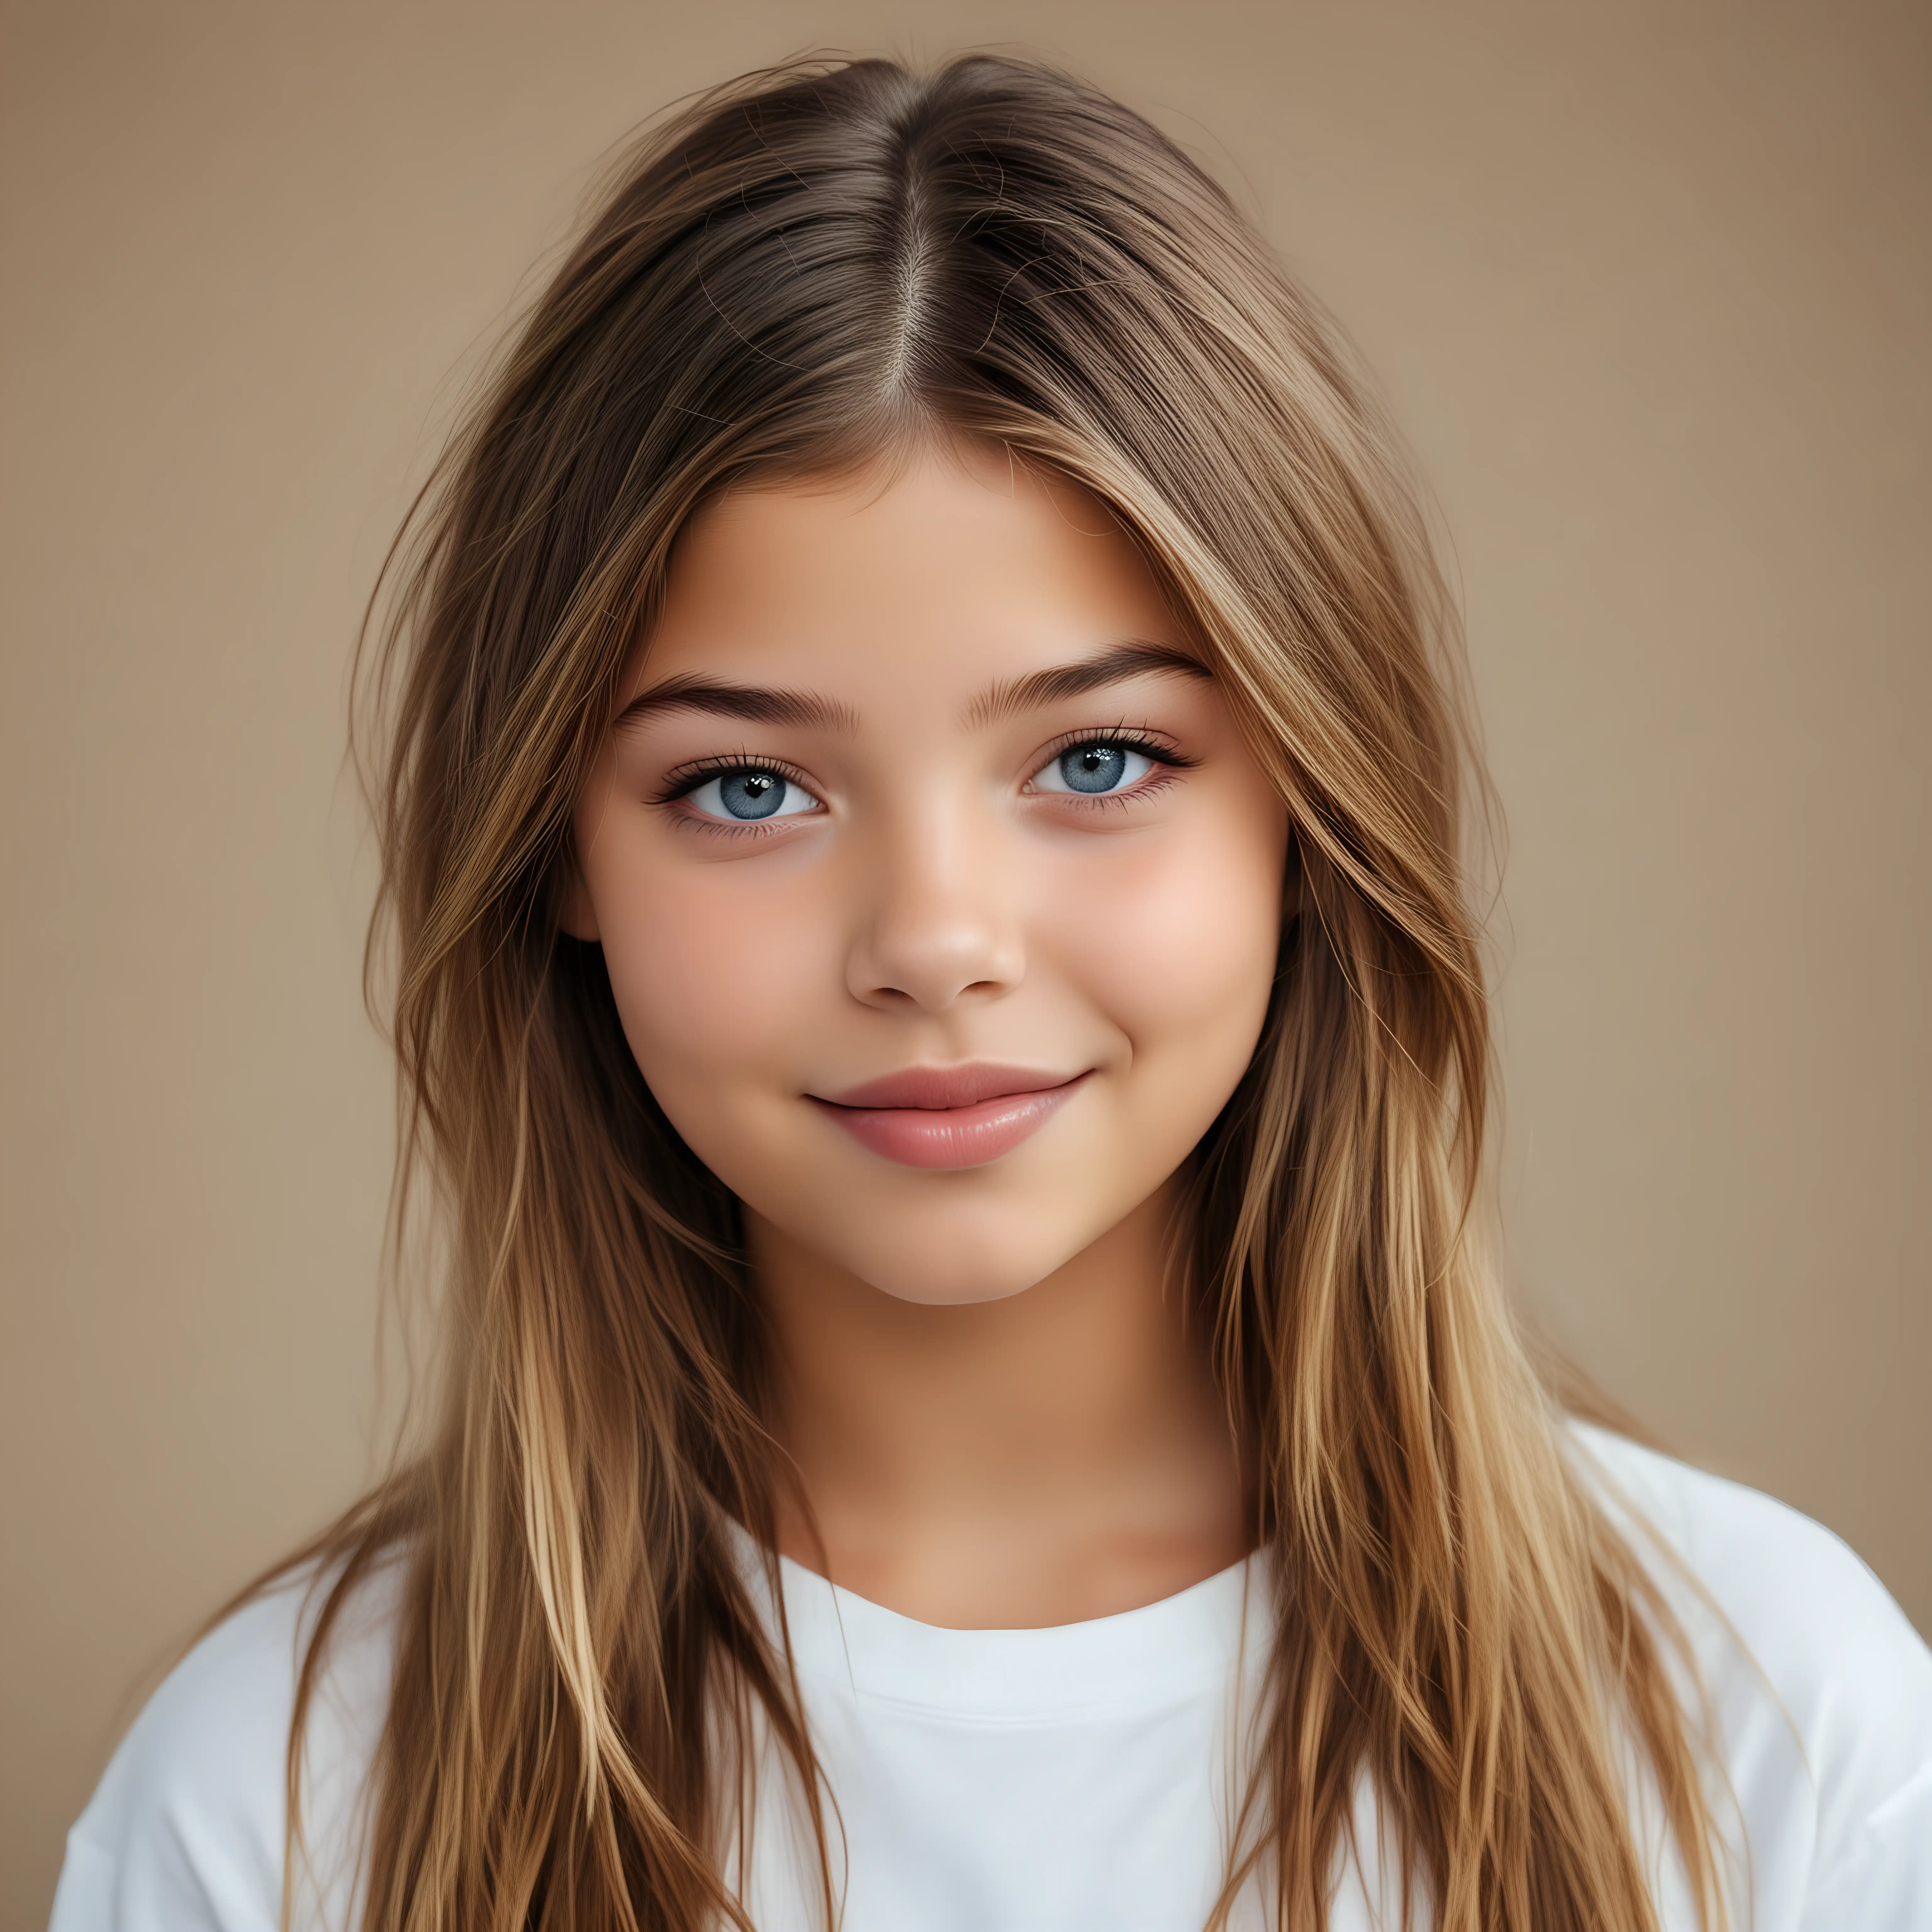 Adorable Portrait of Thylane Blondeau French Teen with a Loving Smile